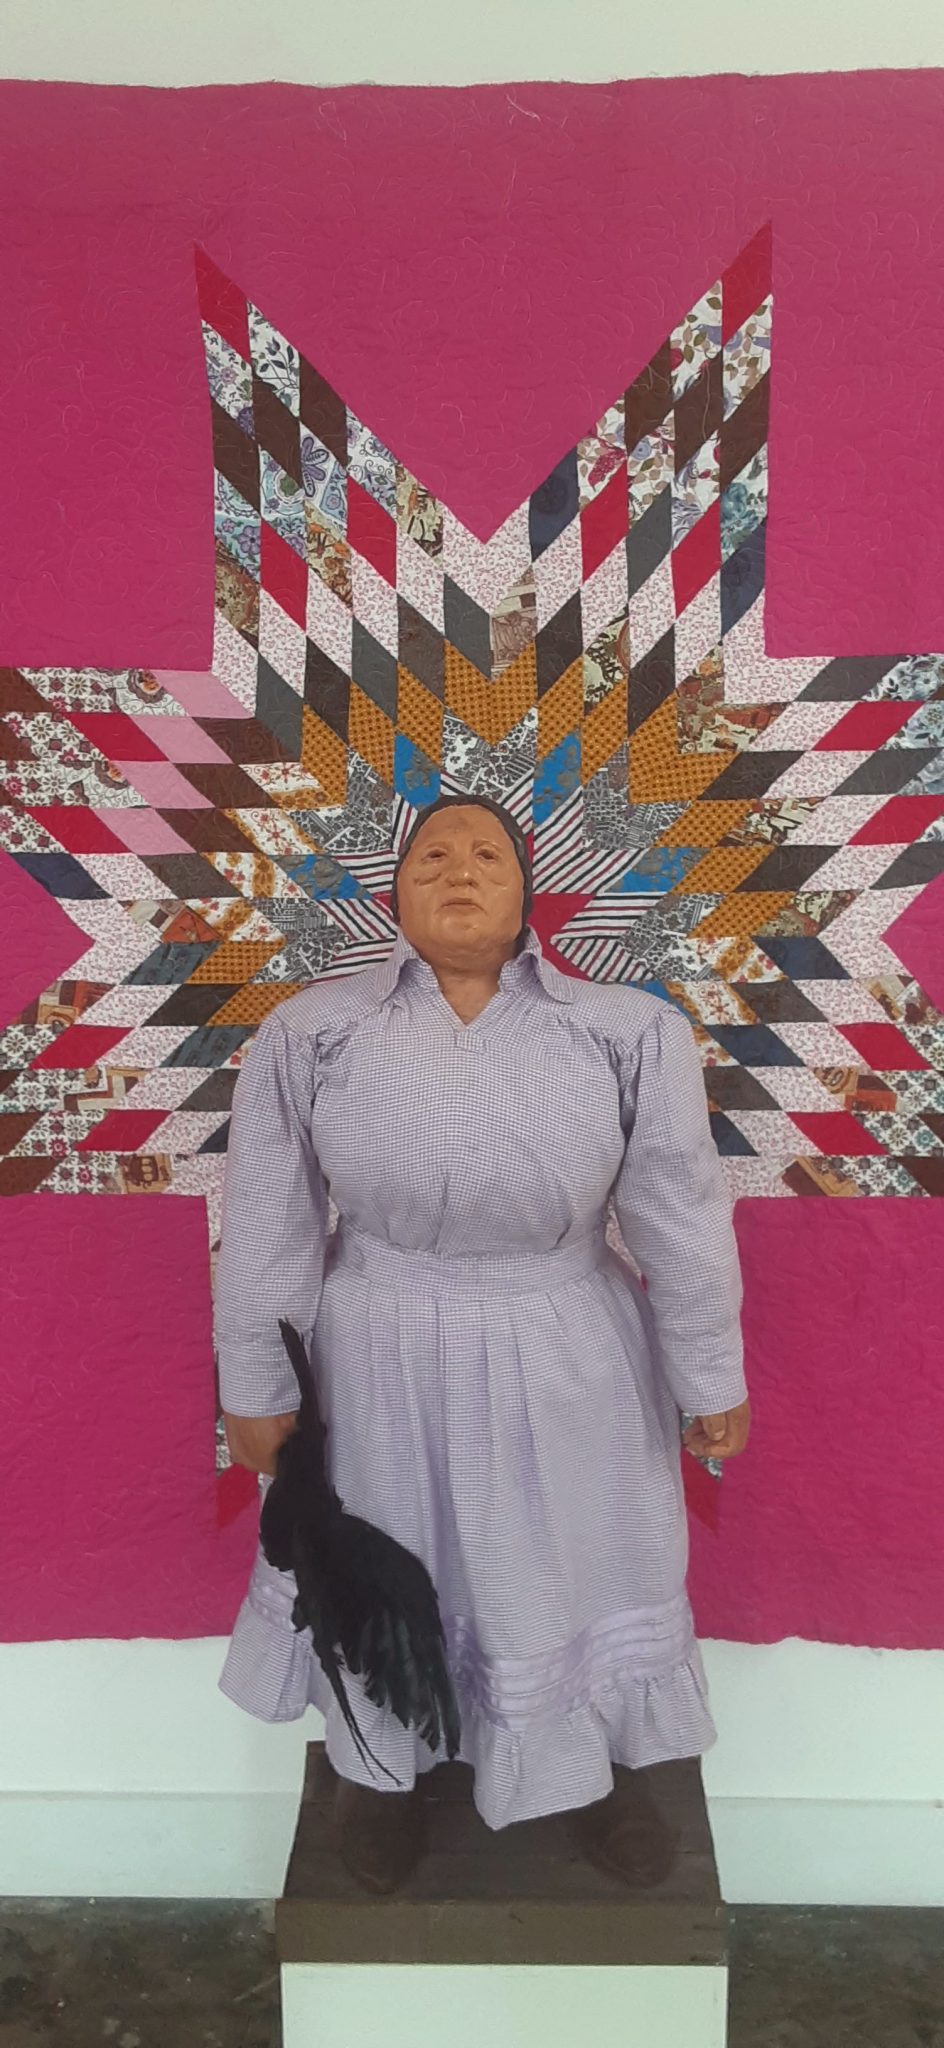 A doll-like figure of a woman in  lavender clothing in front of a pink quilt